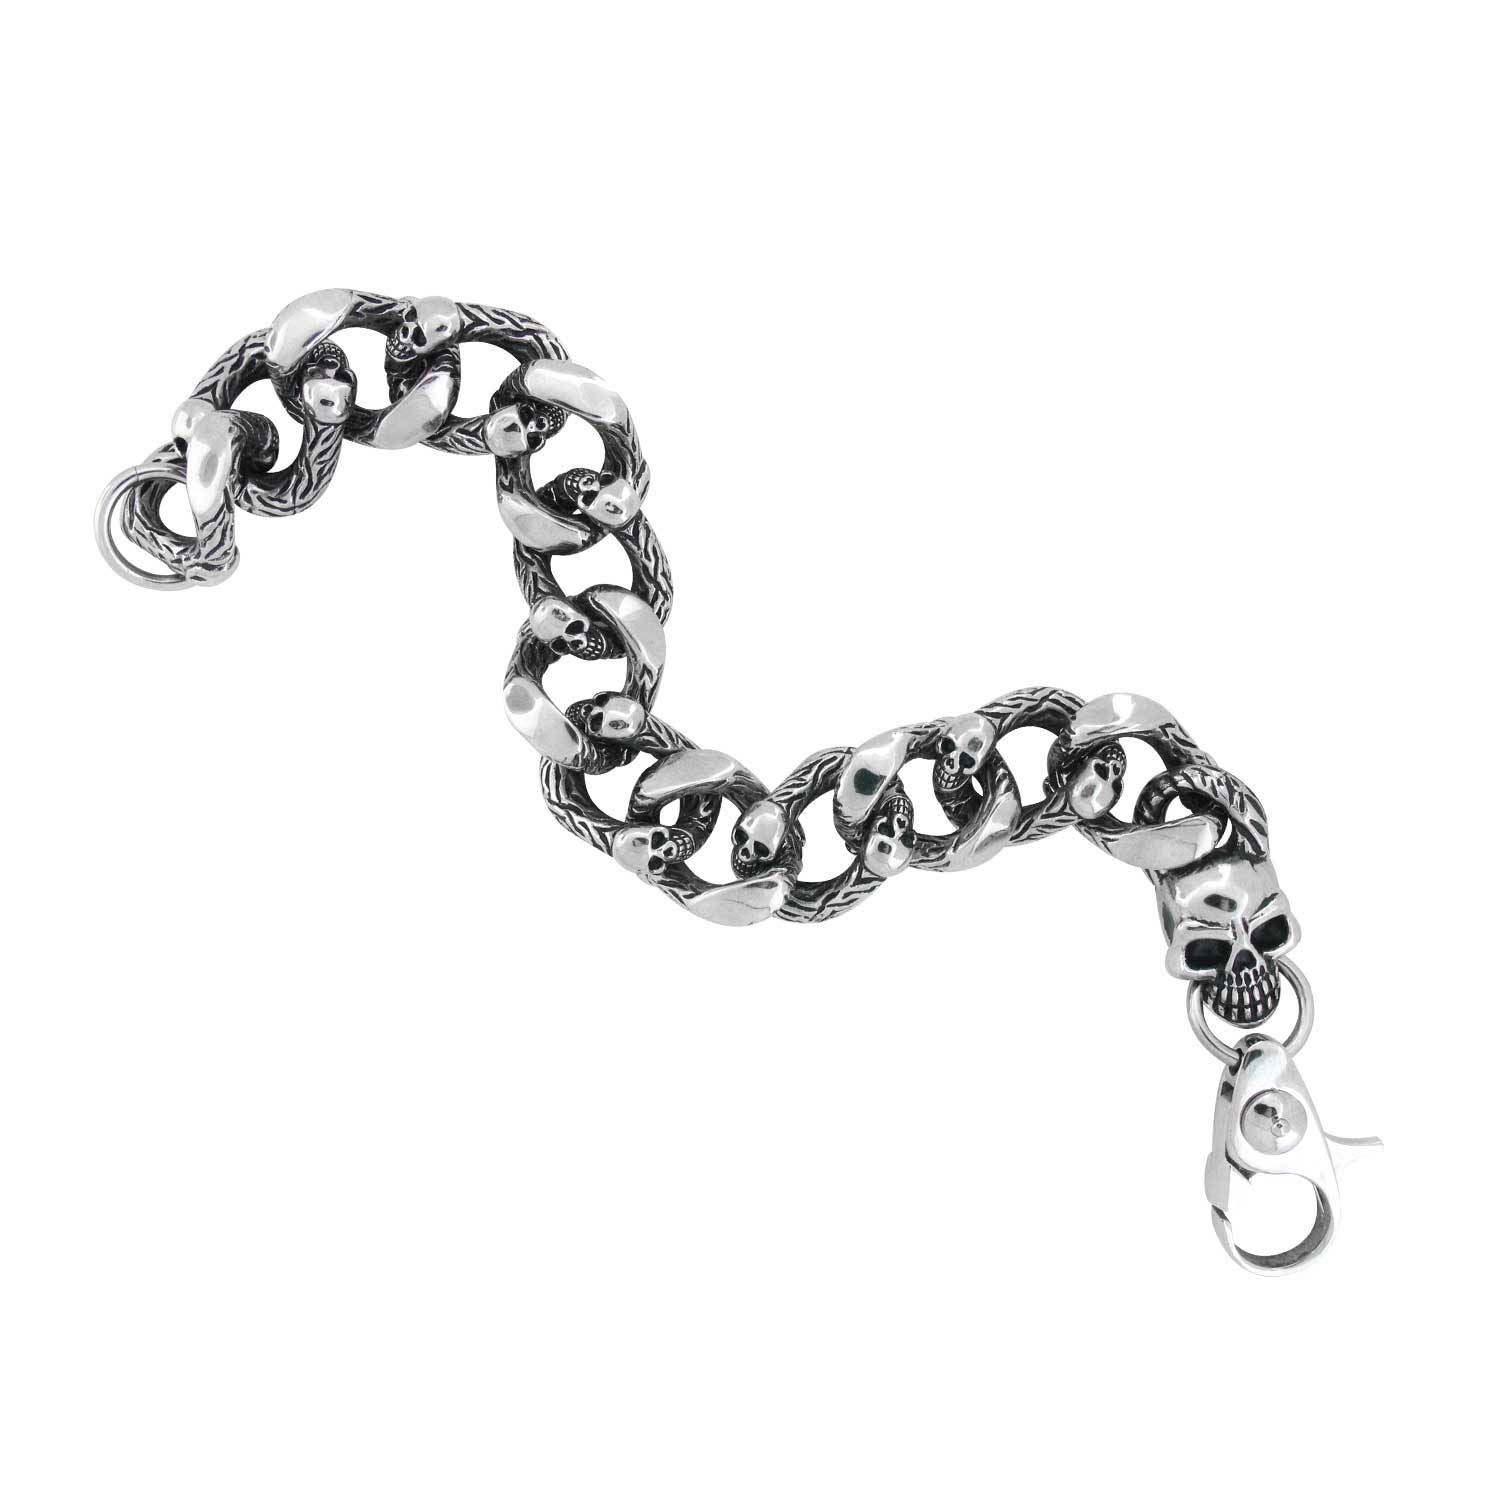 Heavy Duty Curb Chain Bracelet with Casted Skulls Image 2 Enchanted Jewelry Plainfield, CT